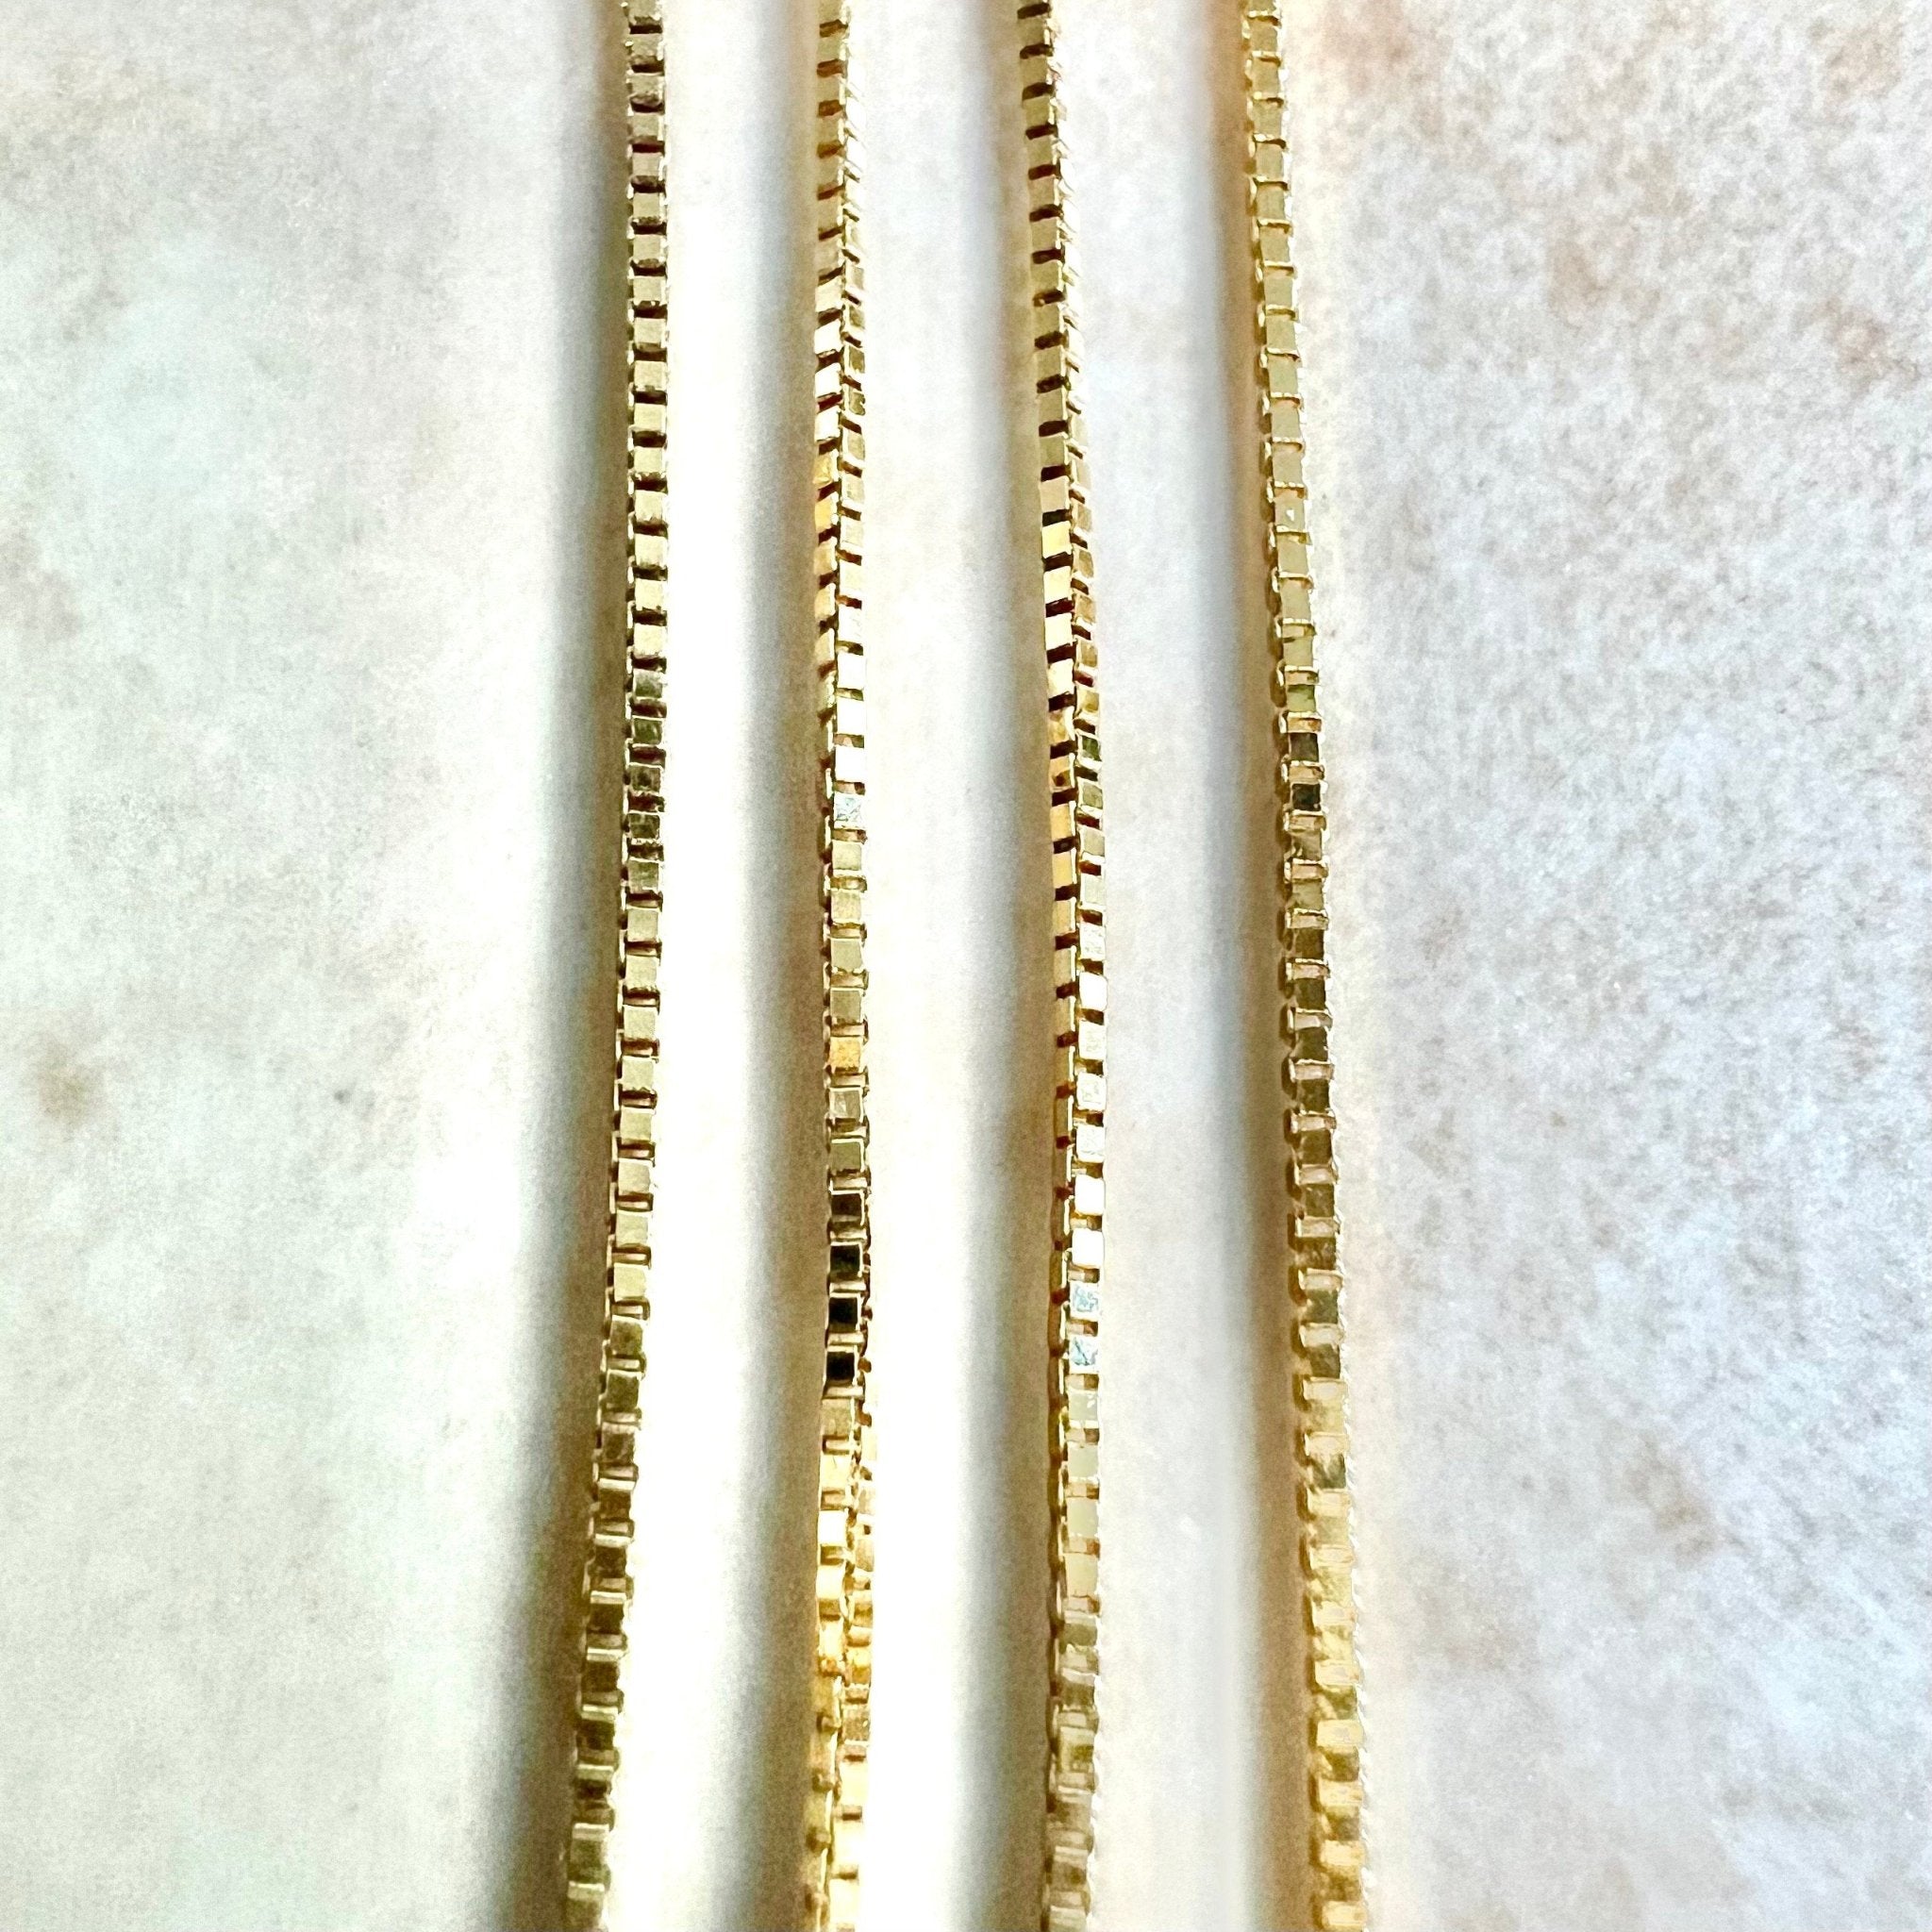 Amazon.com: Wholesale 6PCS 14K Real Gold Plated Brass Box Chain Necklace  Bulk for Jewelry Making (16 inch) : Arts, Crafts & Sewing